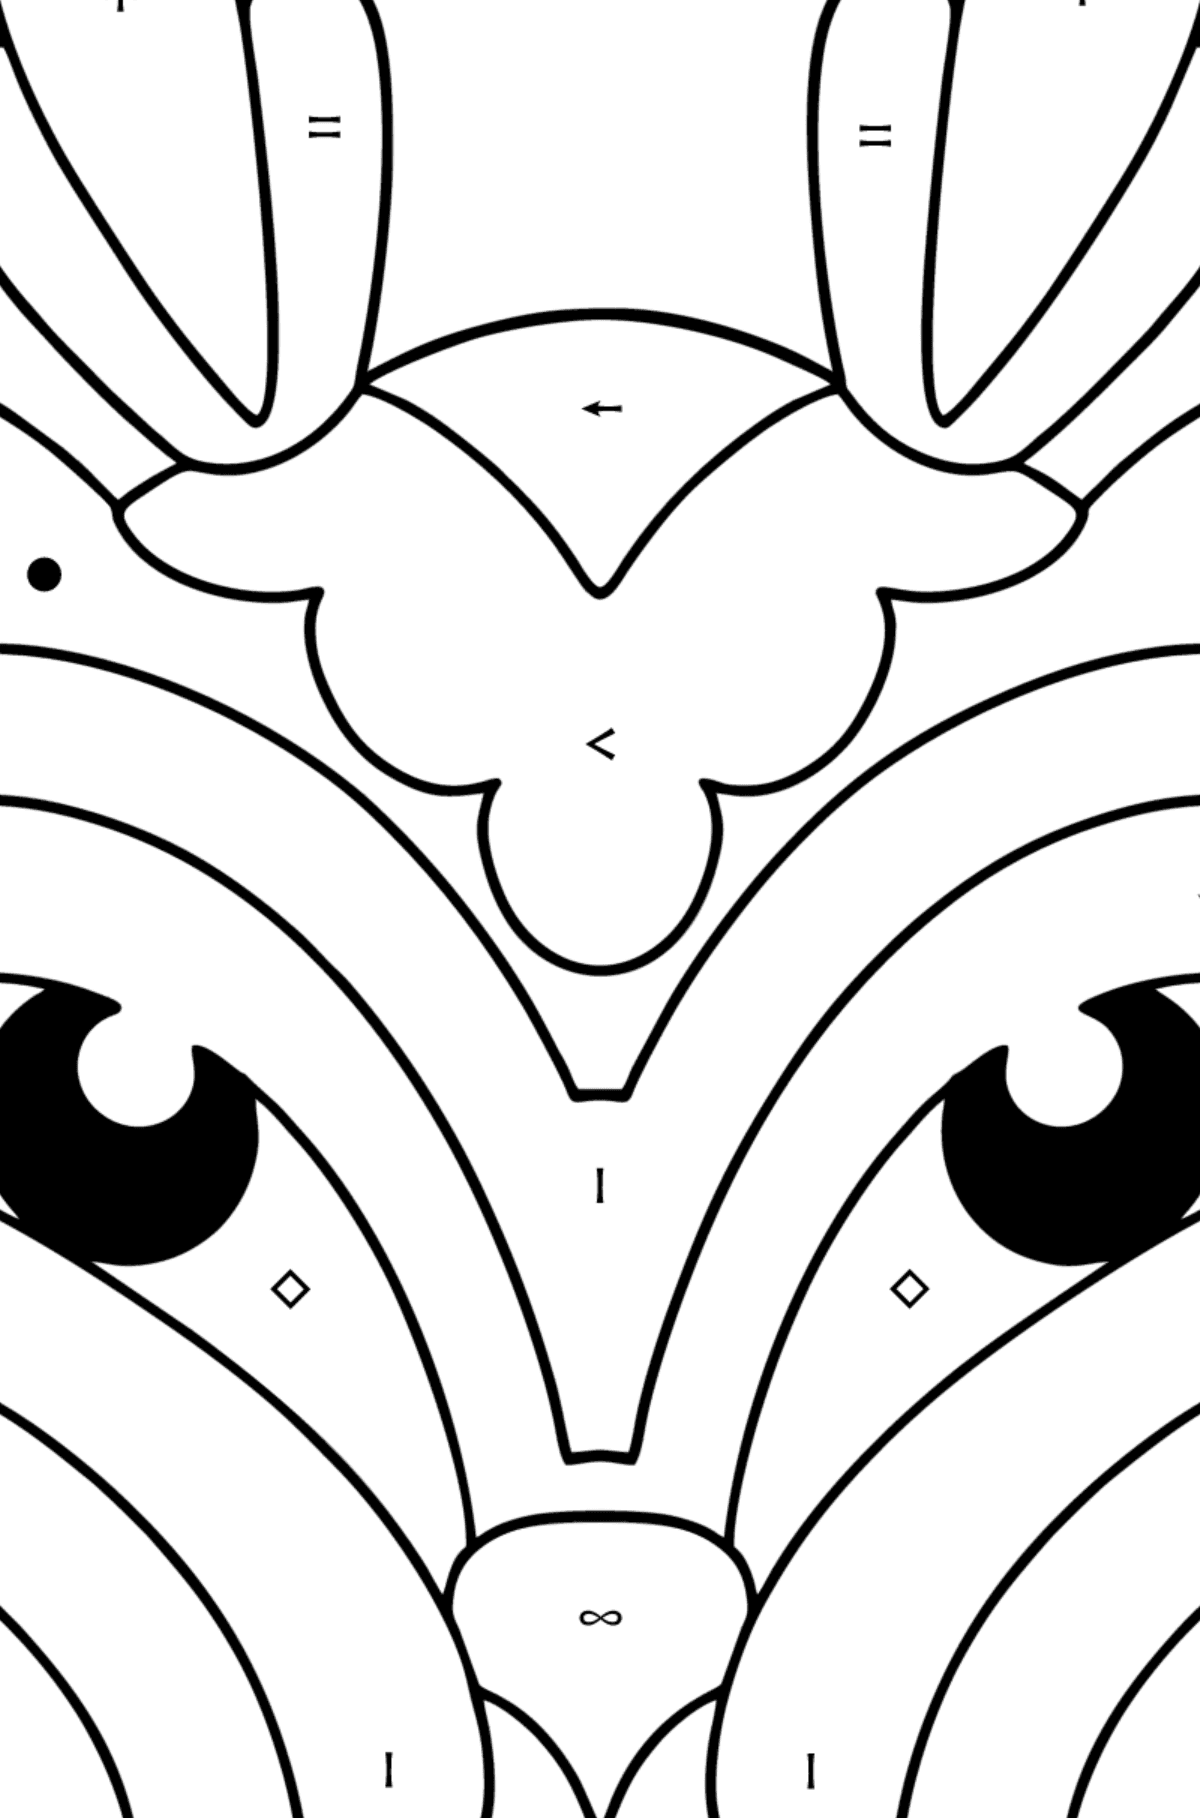 Deer Anti stress coloring page - Coloring by Symbols for Kids